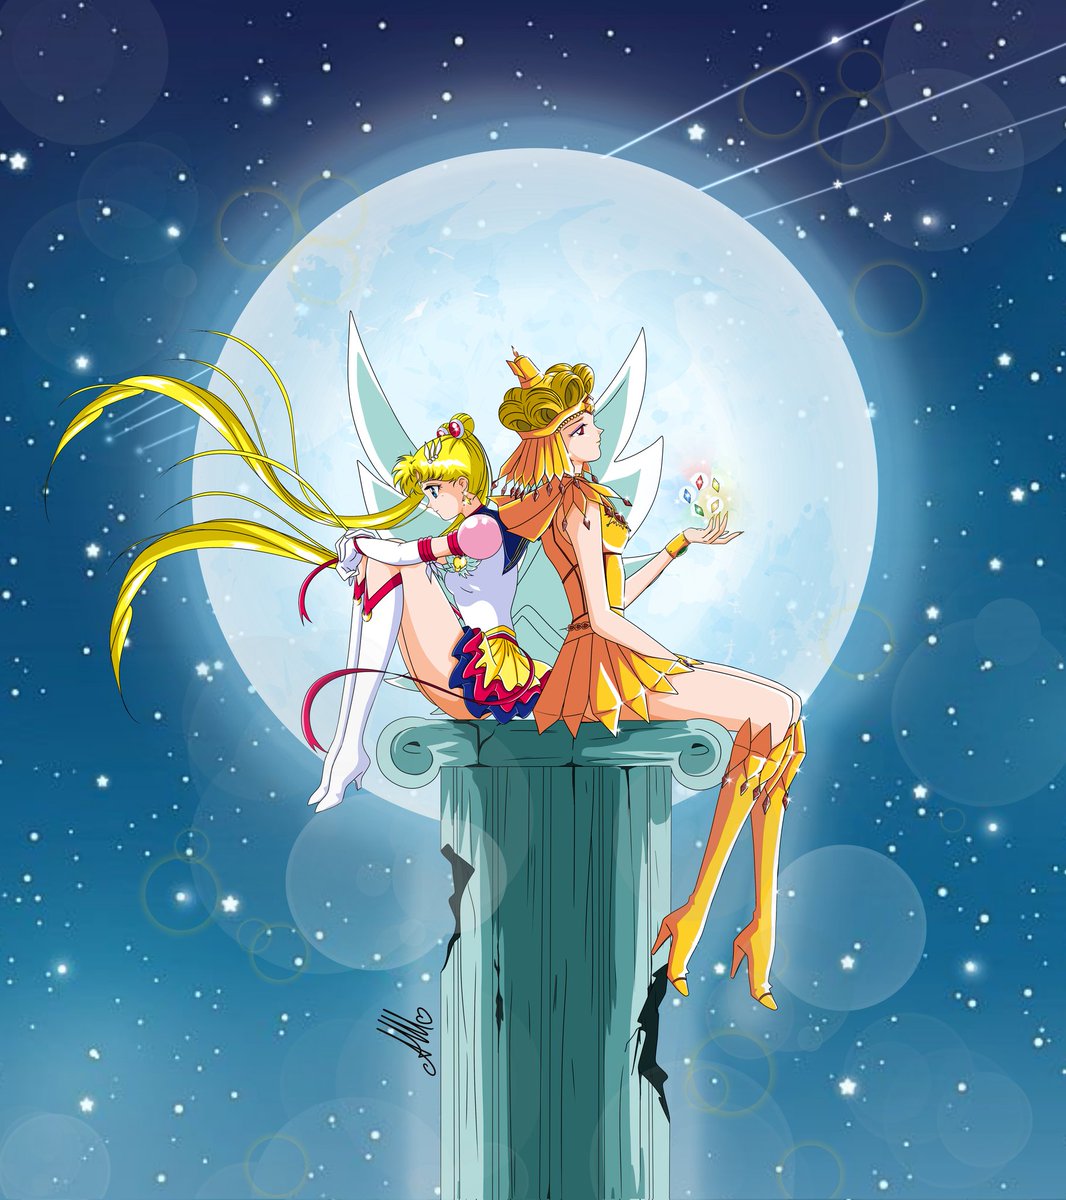 🥳 with this #fanart I wanted to wish everyone a #happynewyear make a wish for the shooting stars you see and it will come true. best wishes to everyone 🙏❤️#sailormooncosmos #naokotakeuchi #supersailormoon #sailorgalaxia   #prettyguardiansailormoon #sailormoon #princessserenity